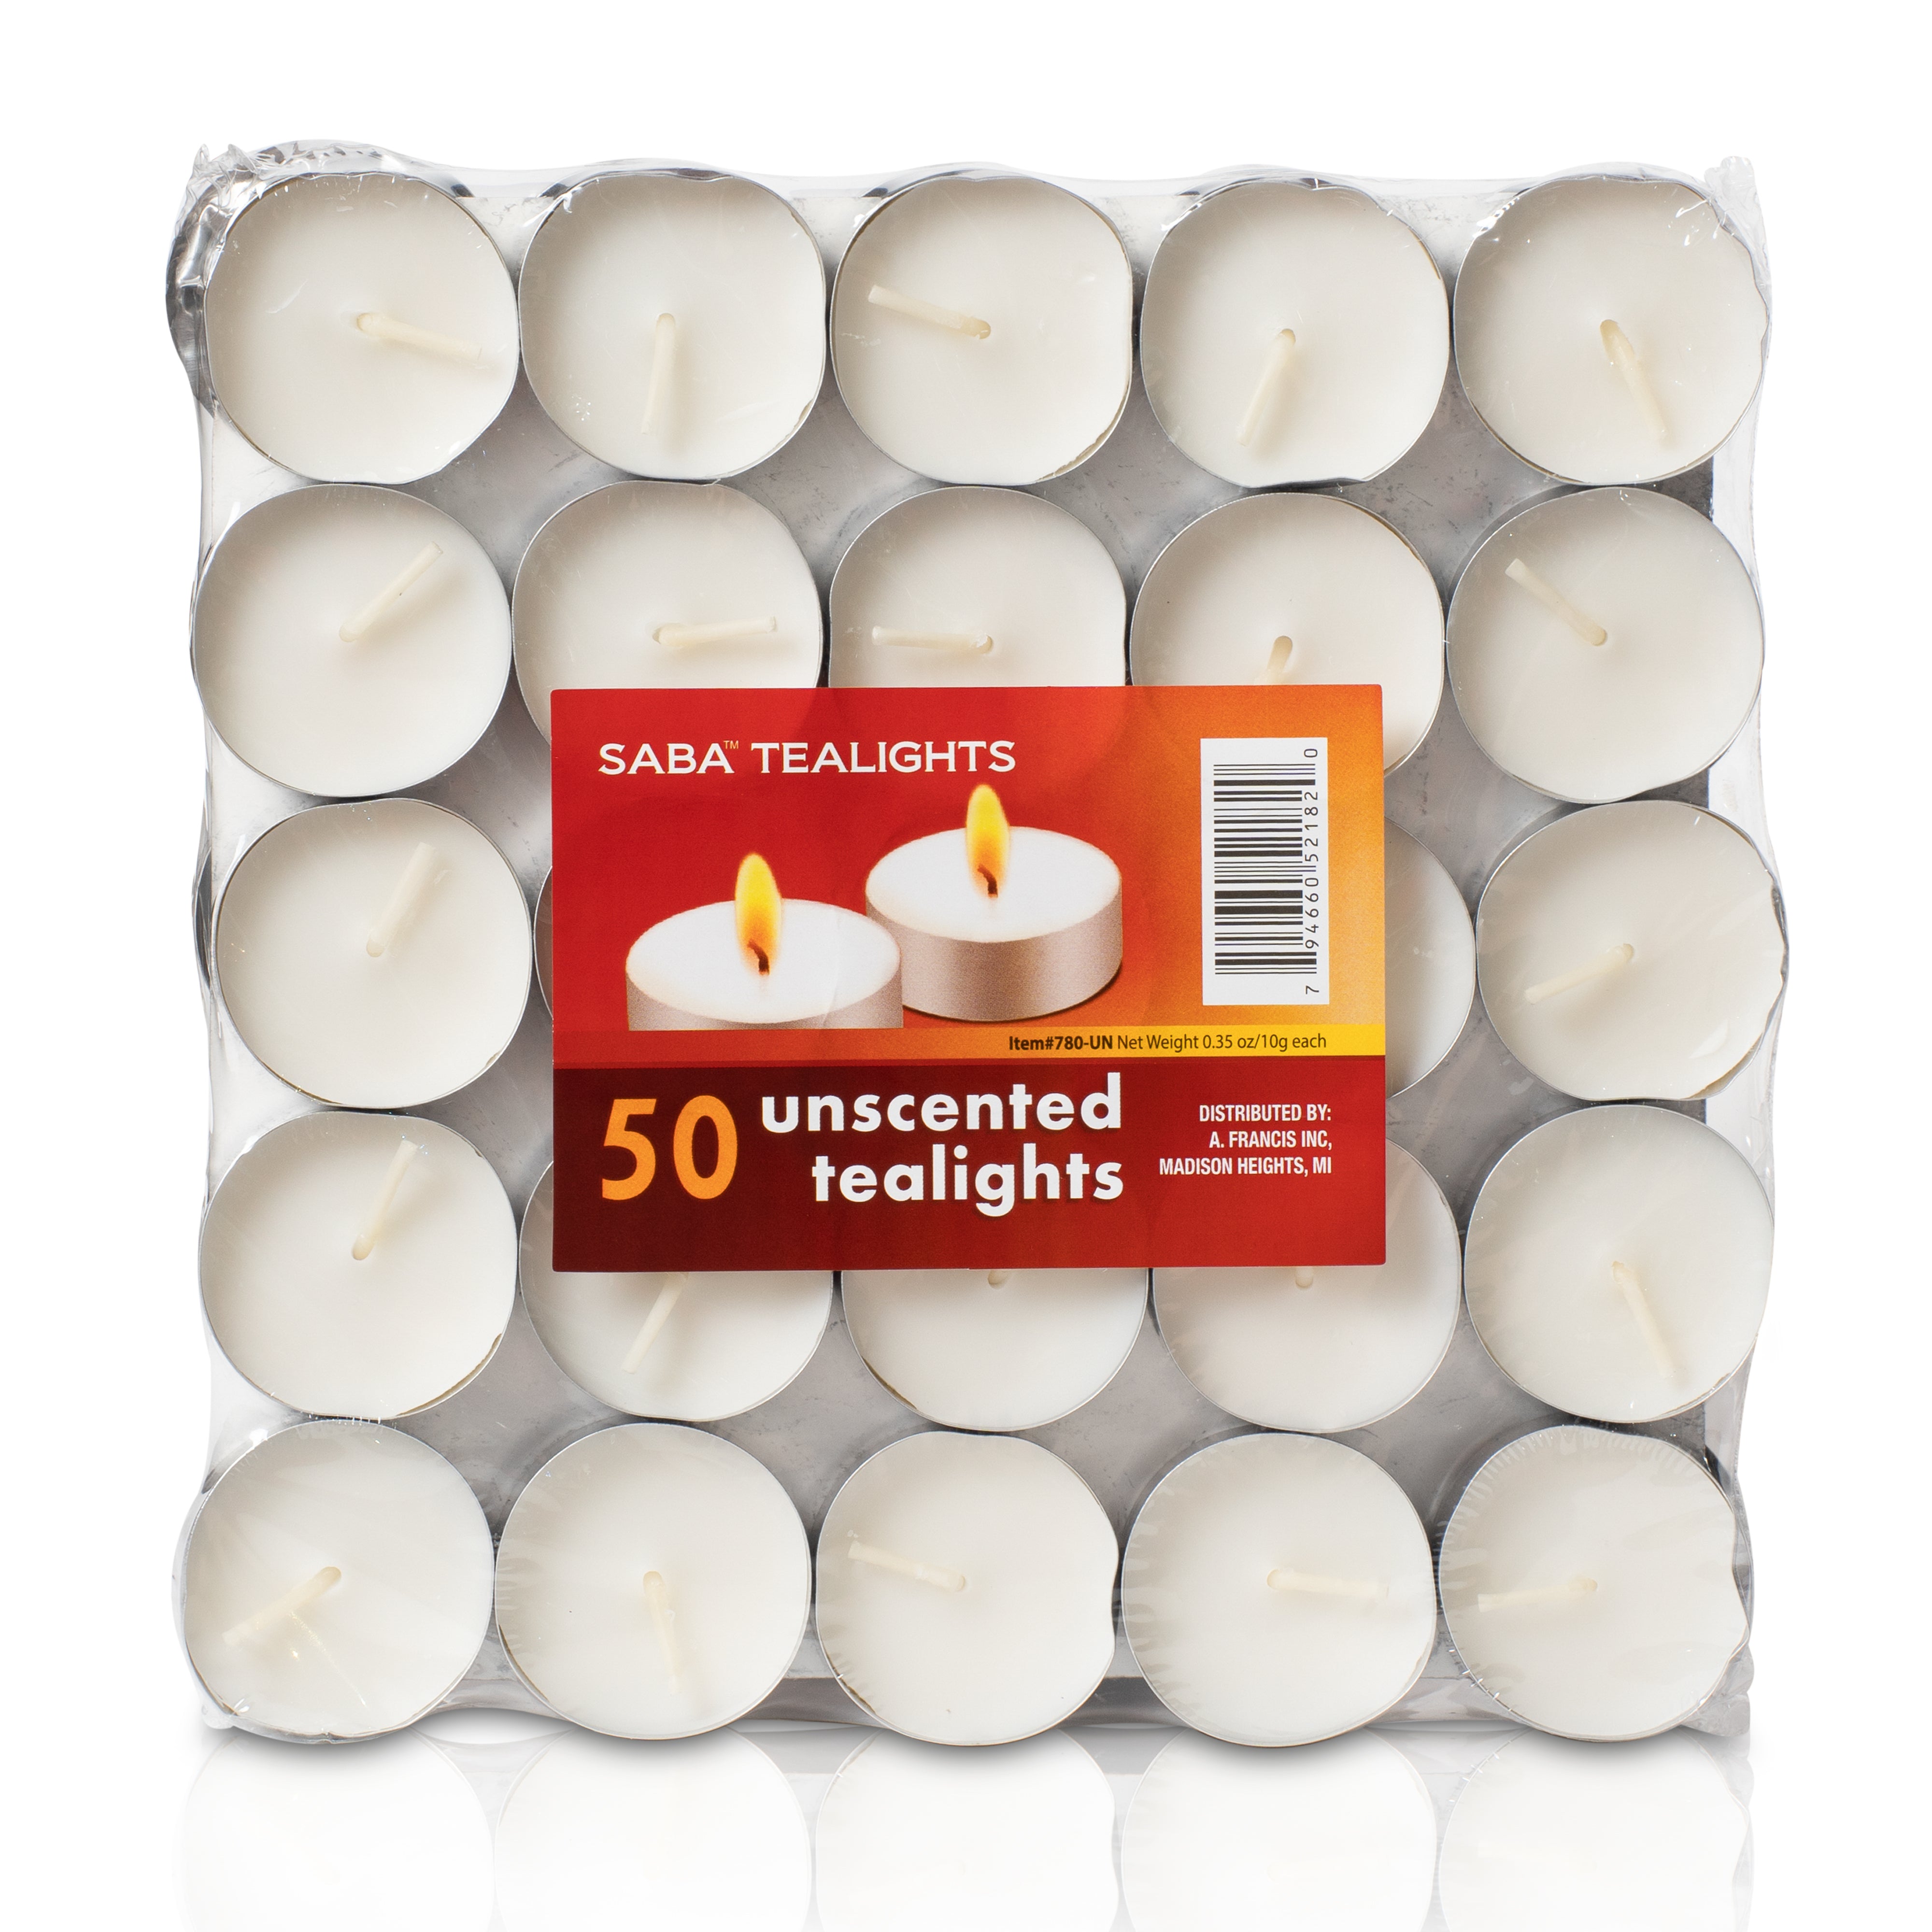 SABA Tealights - "White Unscented" - 50 Pack- Made in USA (36 Count)